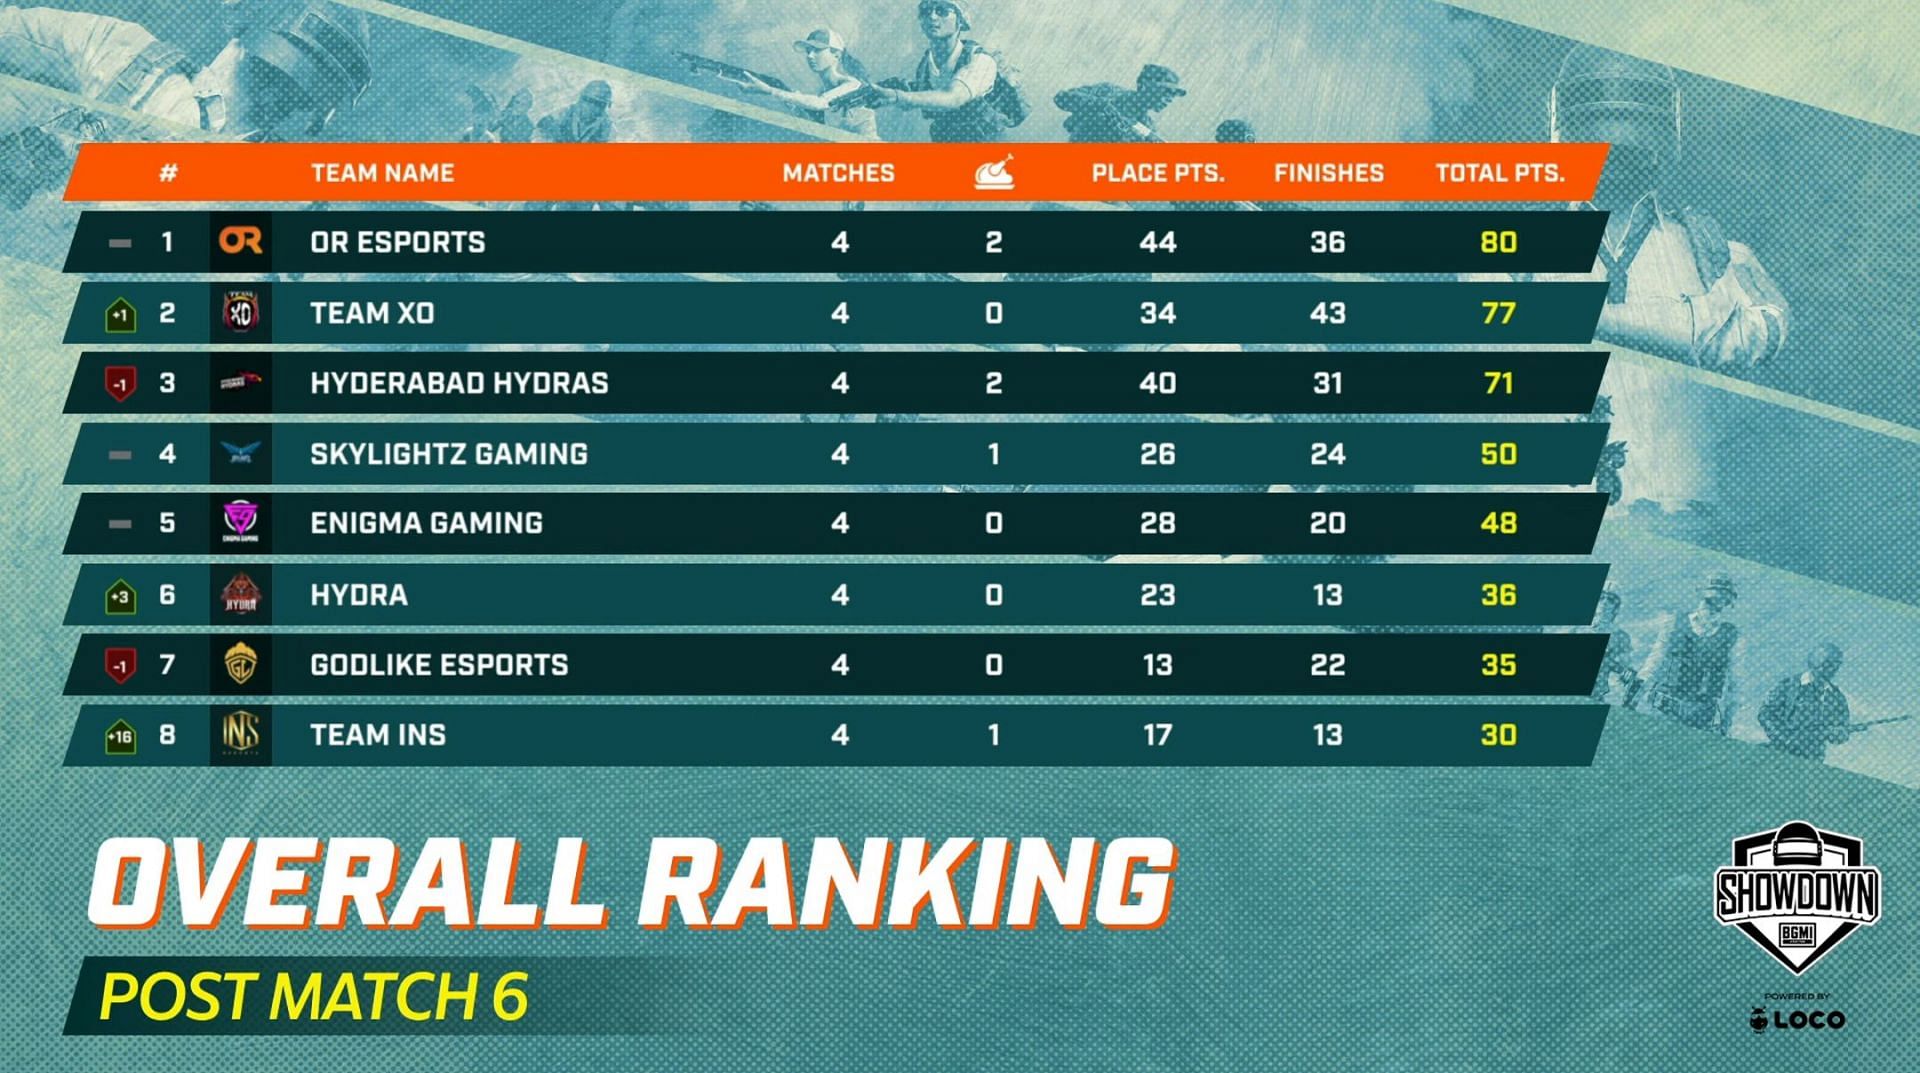 OR Esports earned top place after BGMI Showdown day 1 (Image via Krafton)